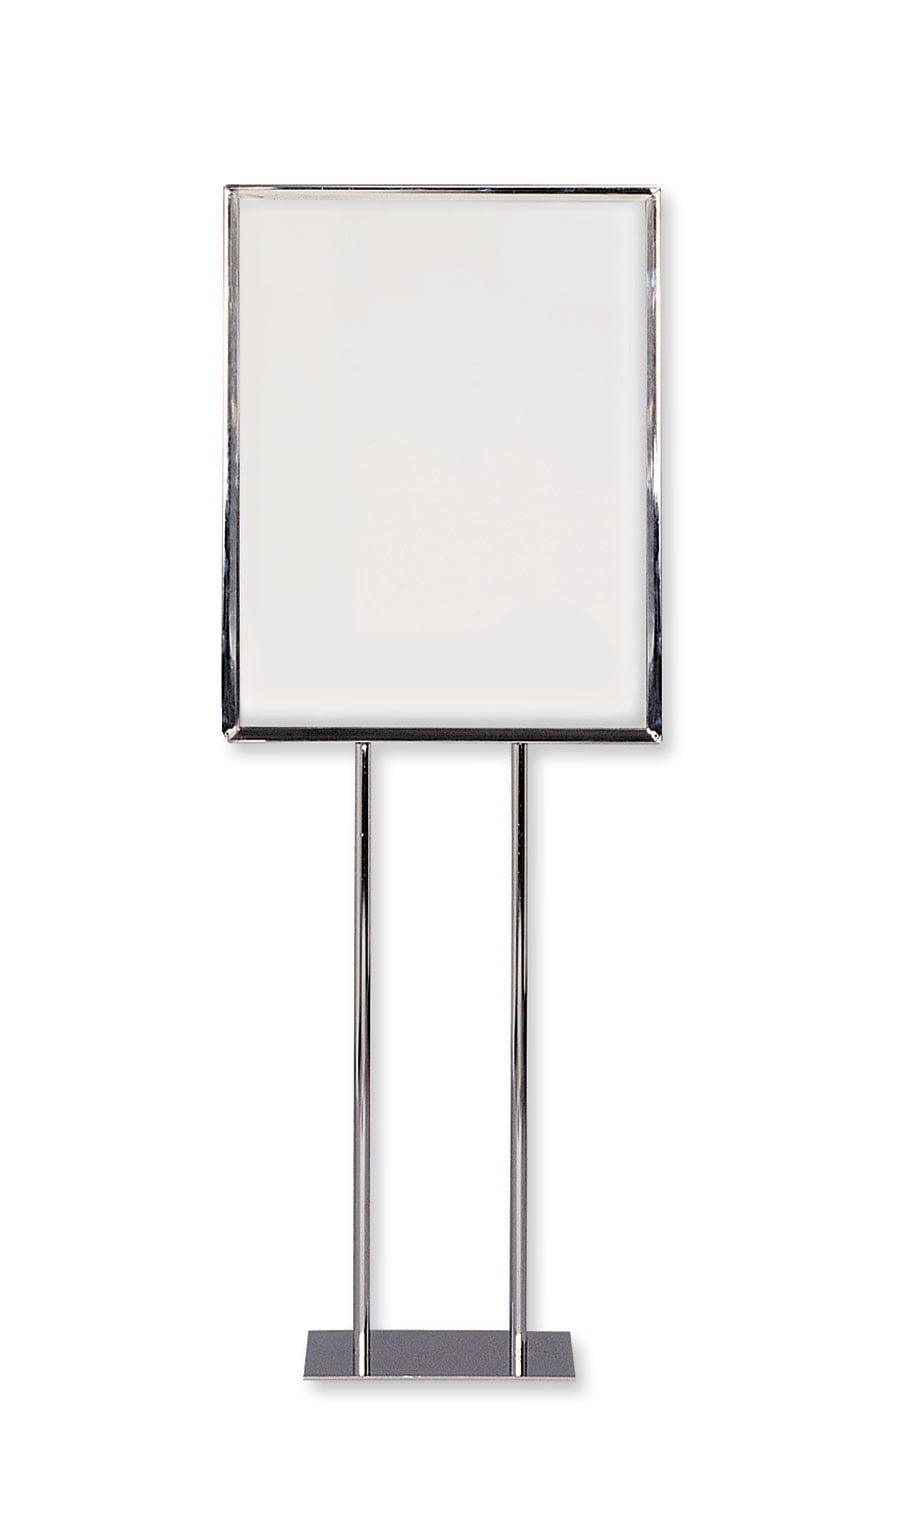 White Add A-Message Board Kit For QLA A-Frame Sign Holders, SKU: K2-5990